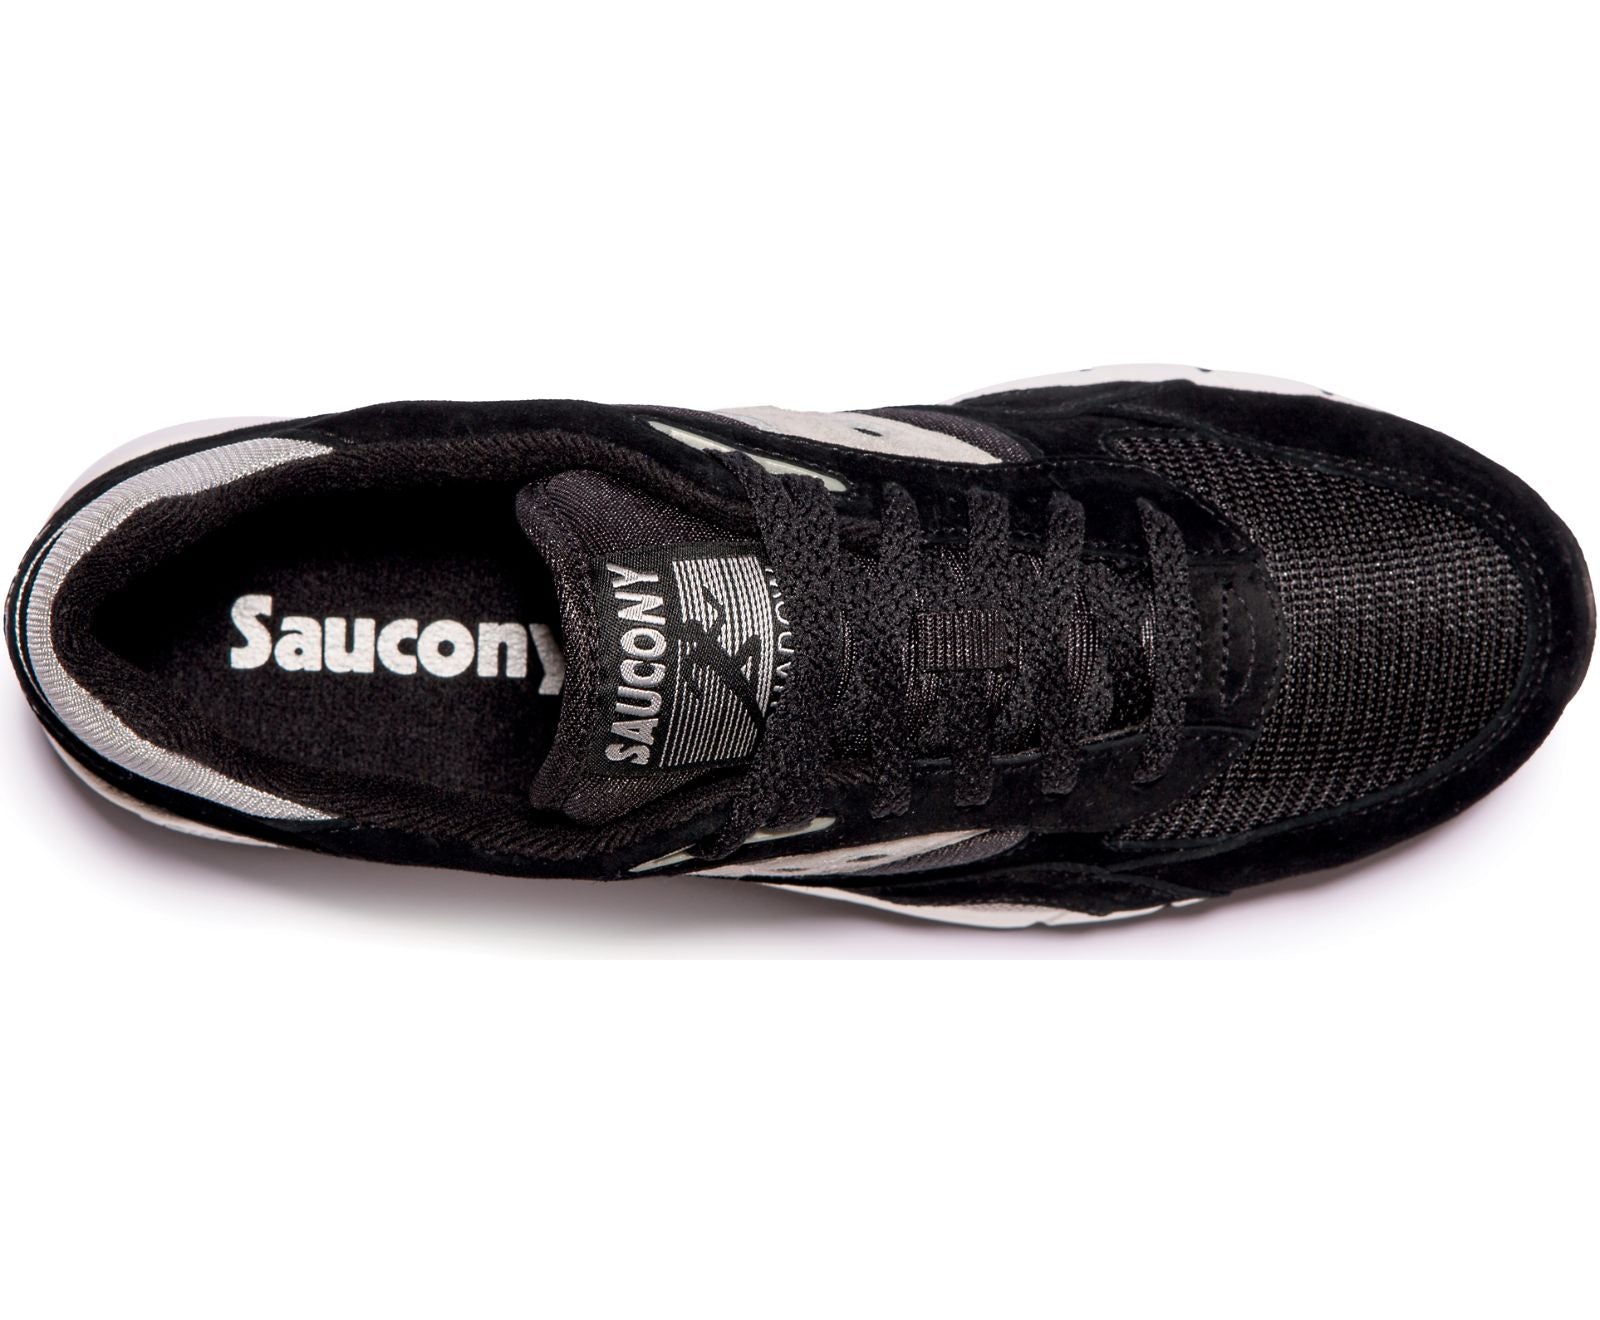 Top view of the Men's Saucony Shadow 6000 in Black/Silver